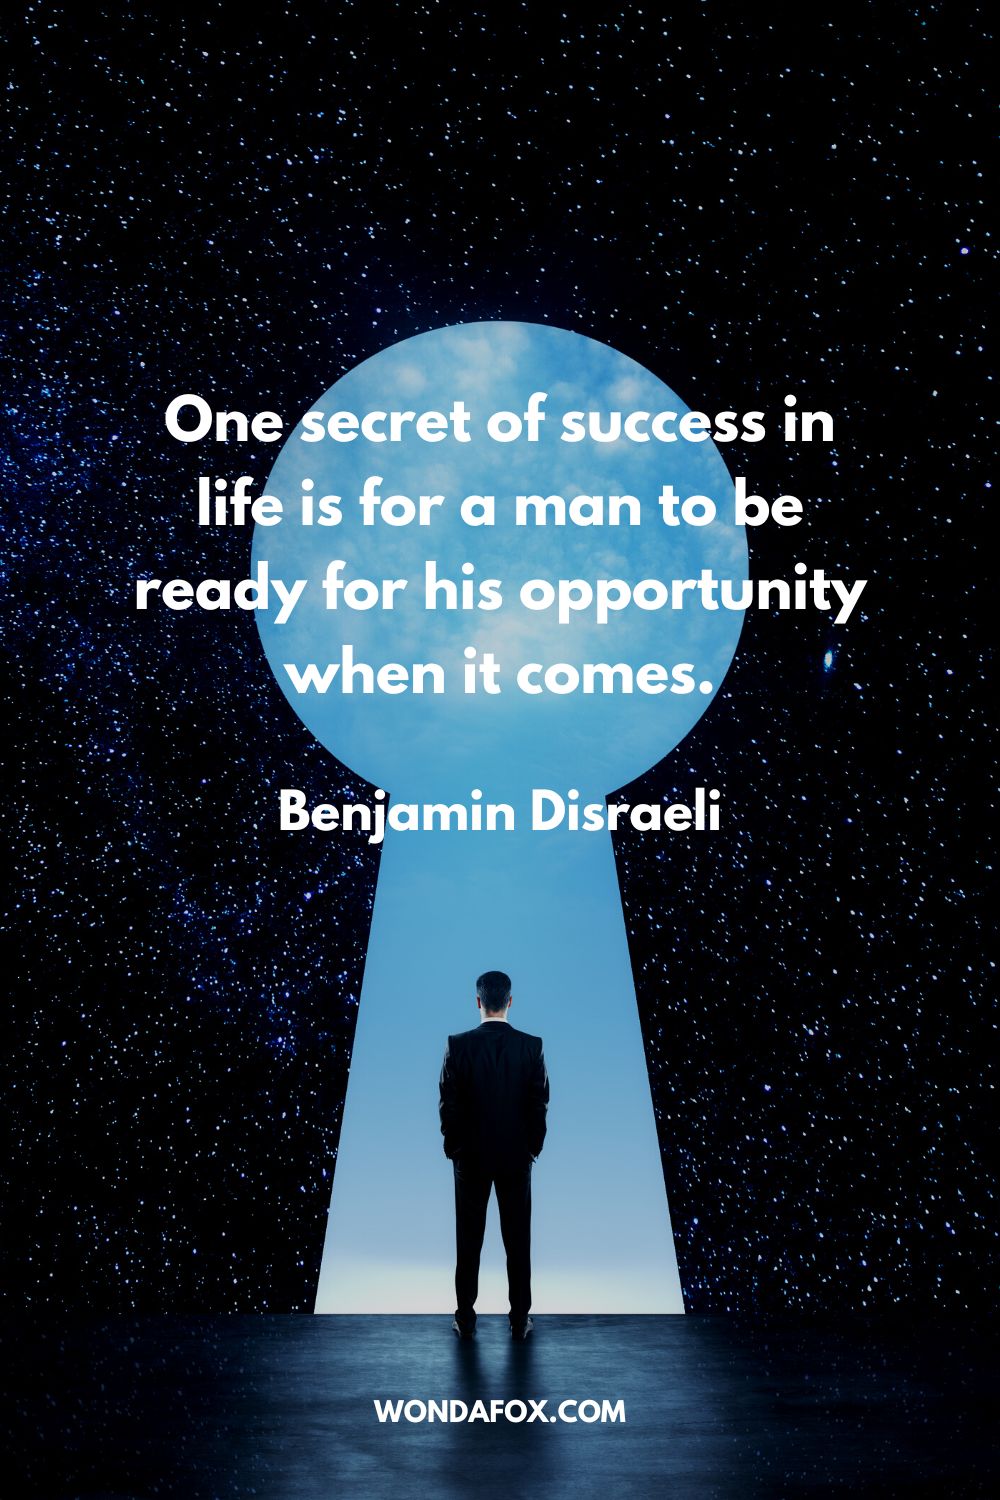 One secret of success in life is for a man to be ready for his opportunity when it comes. Benjamin Disraeli